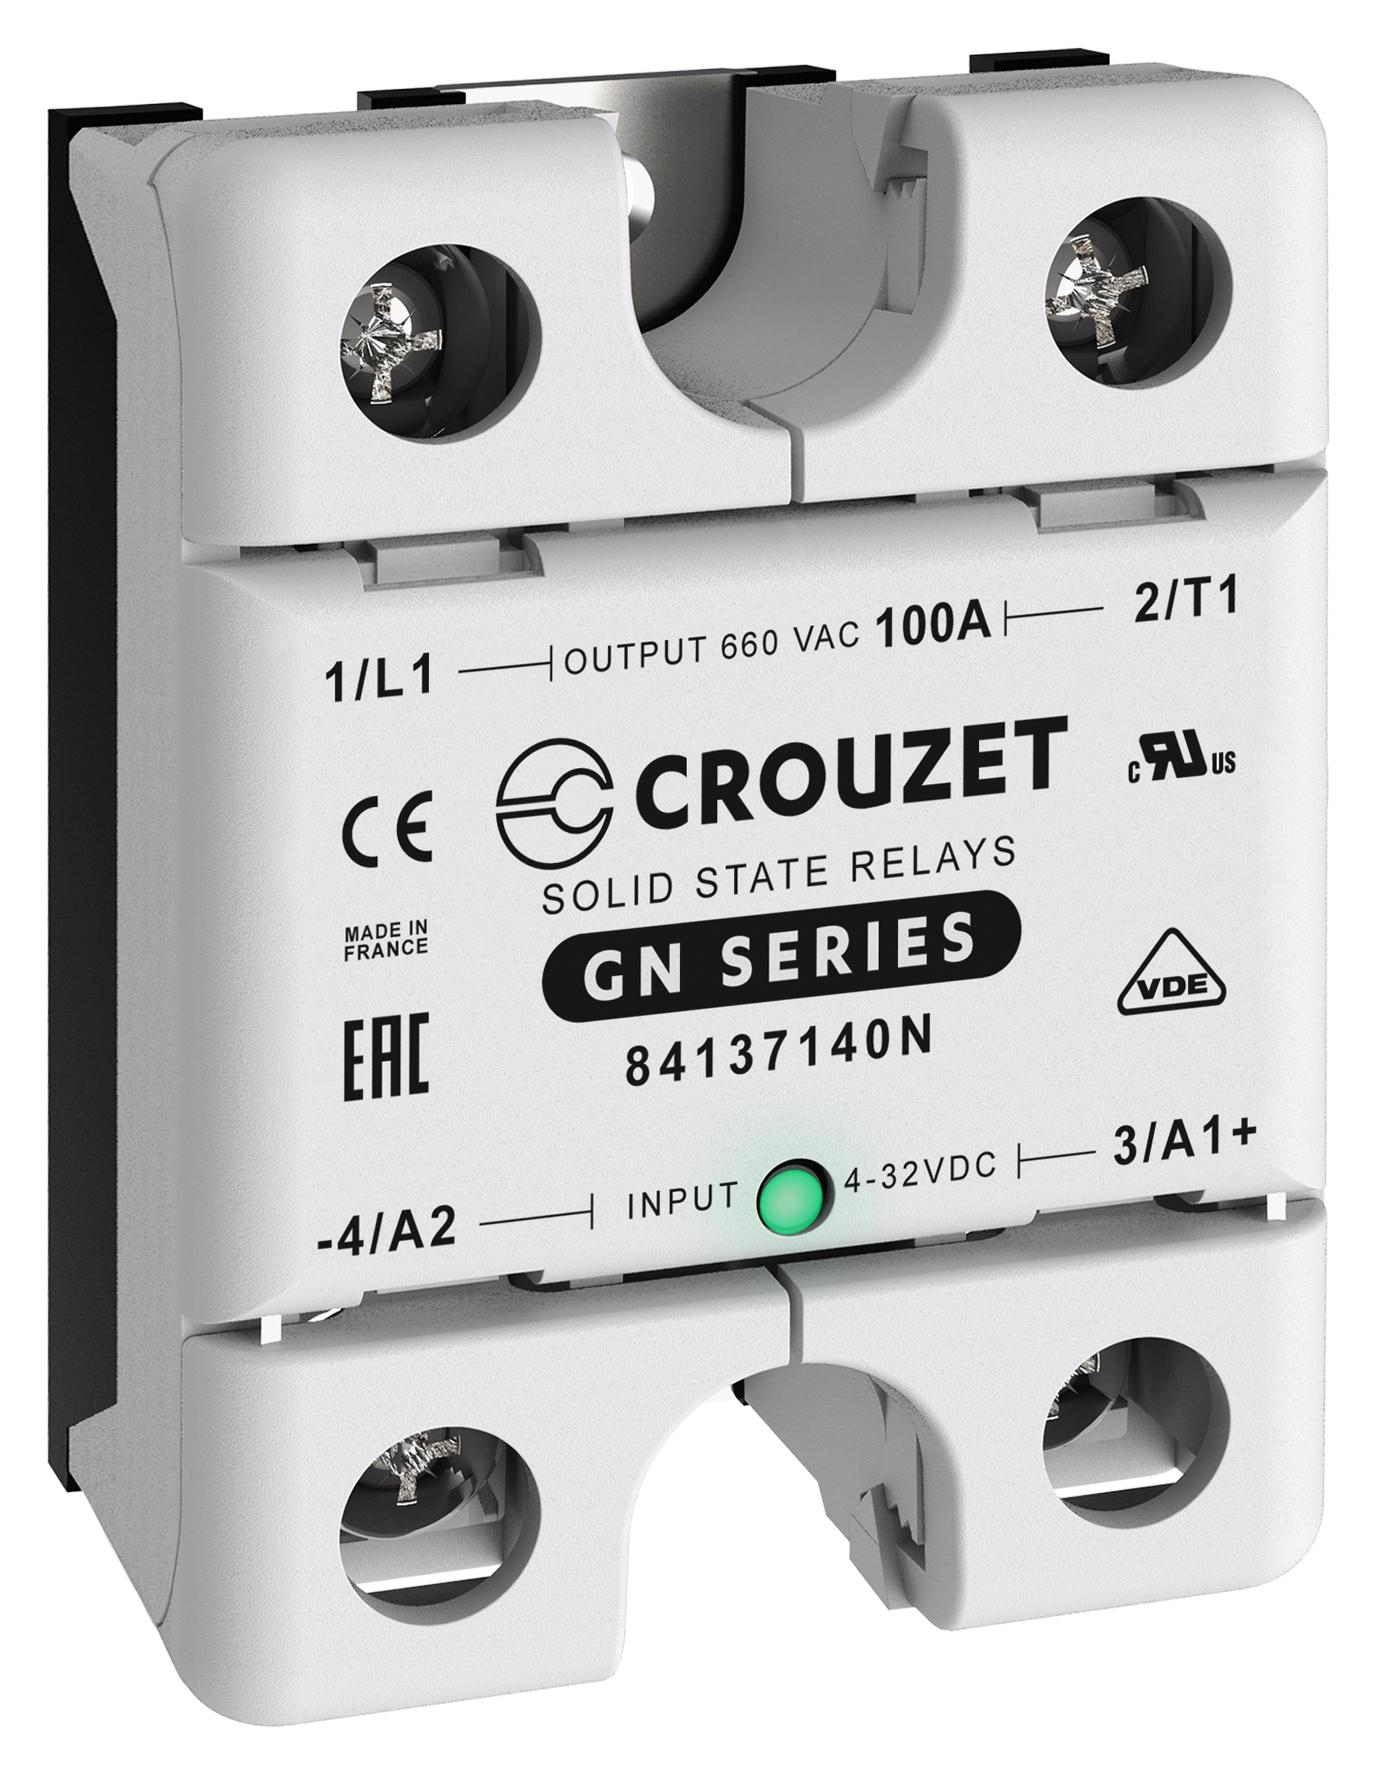 84137140N SOLID STATE RELAY, 100A, 48-660VAC/PANEL CROUZET